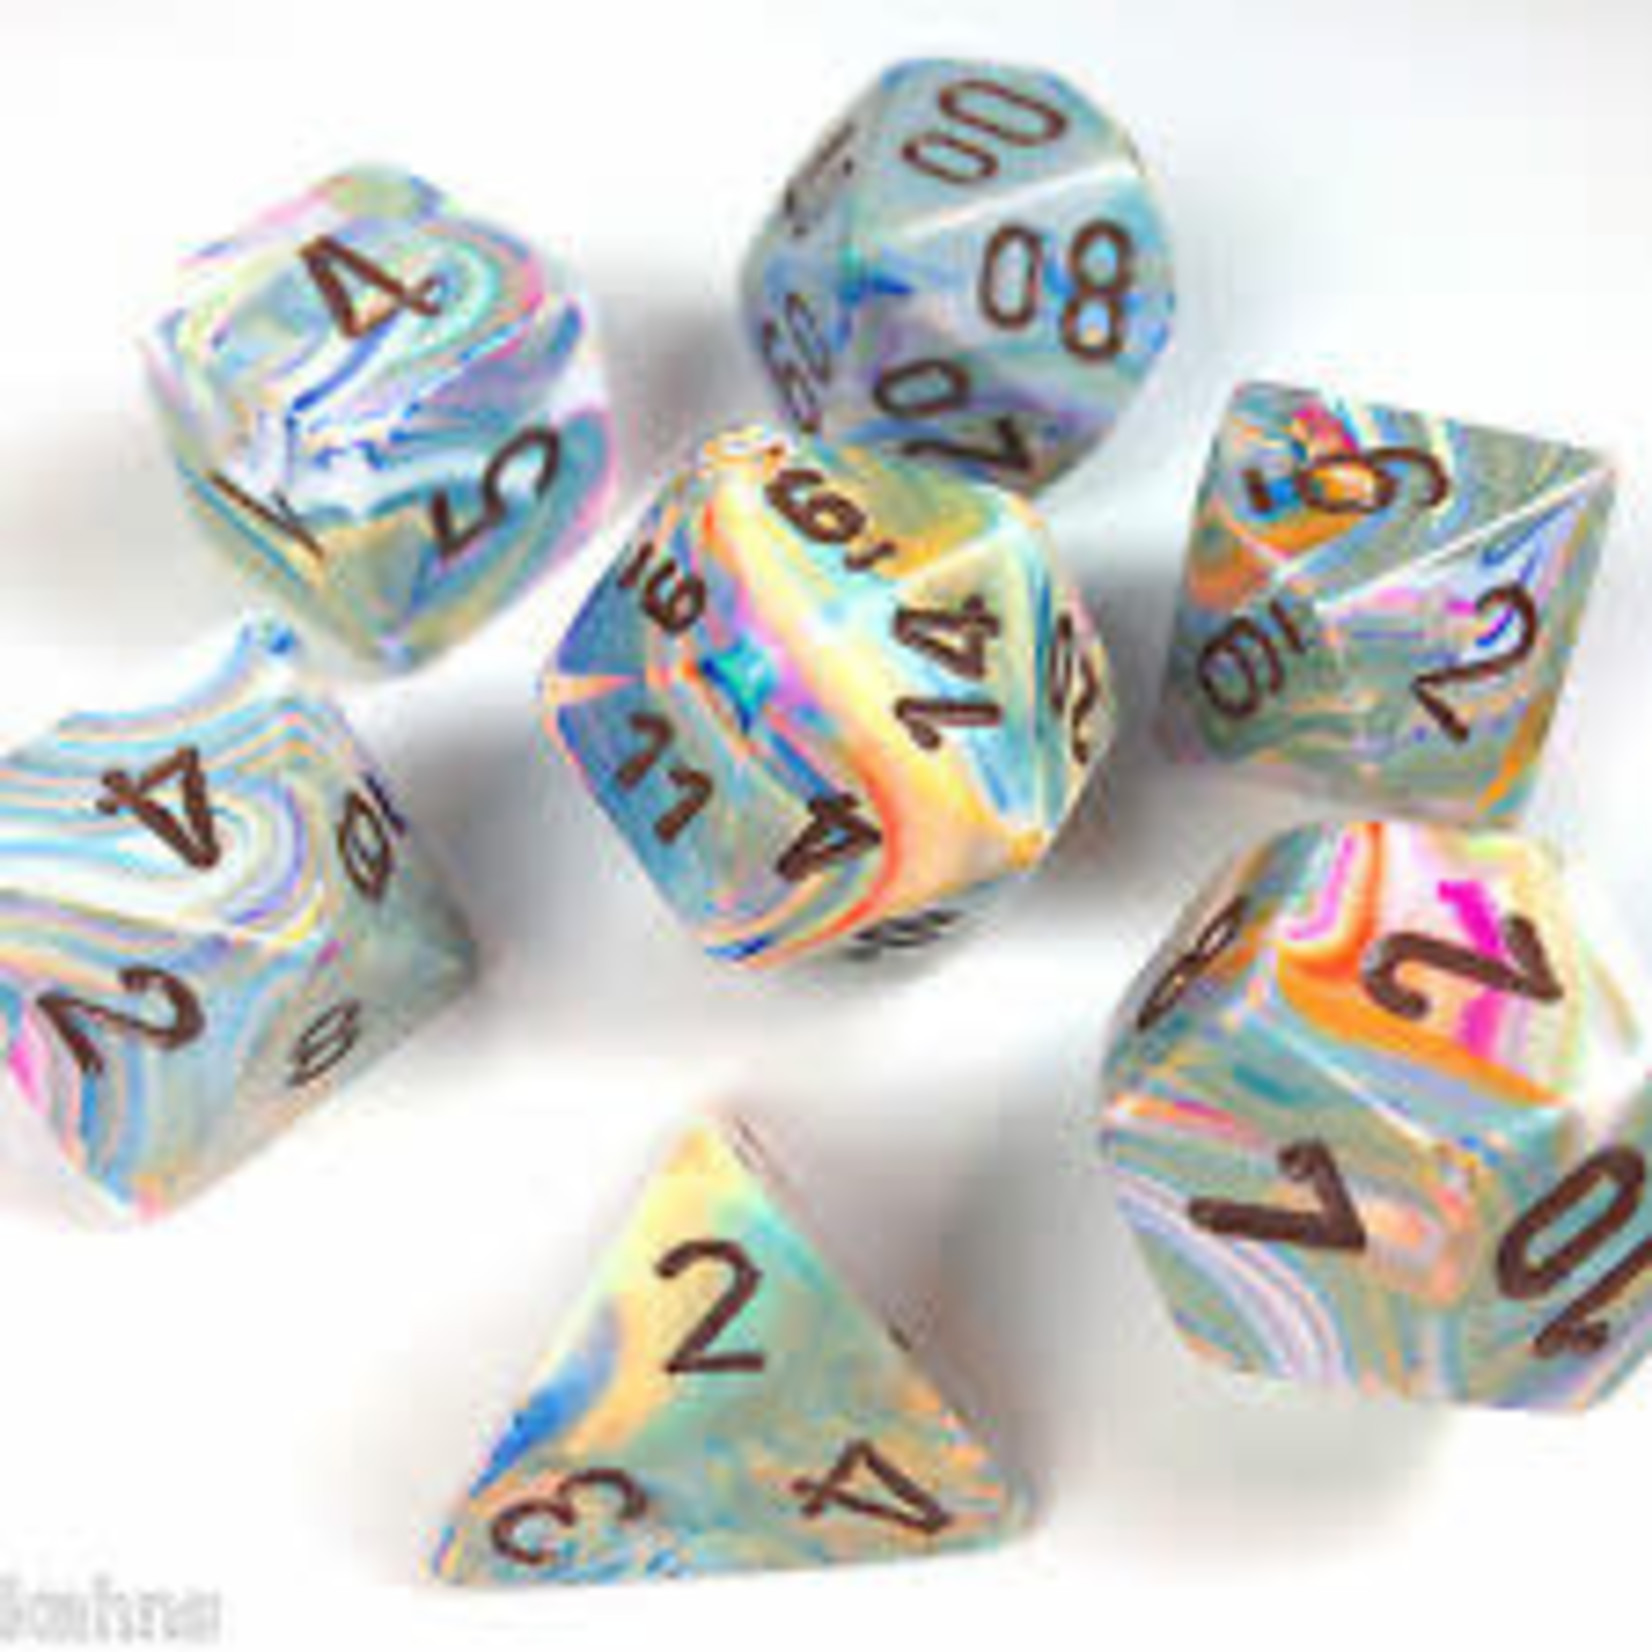 Chessex 7-Piece Dice Set: Festive & Vibrant with Brown Numbers